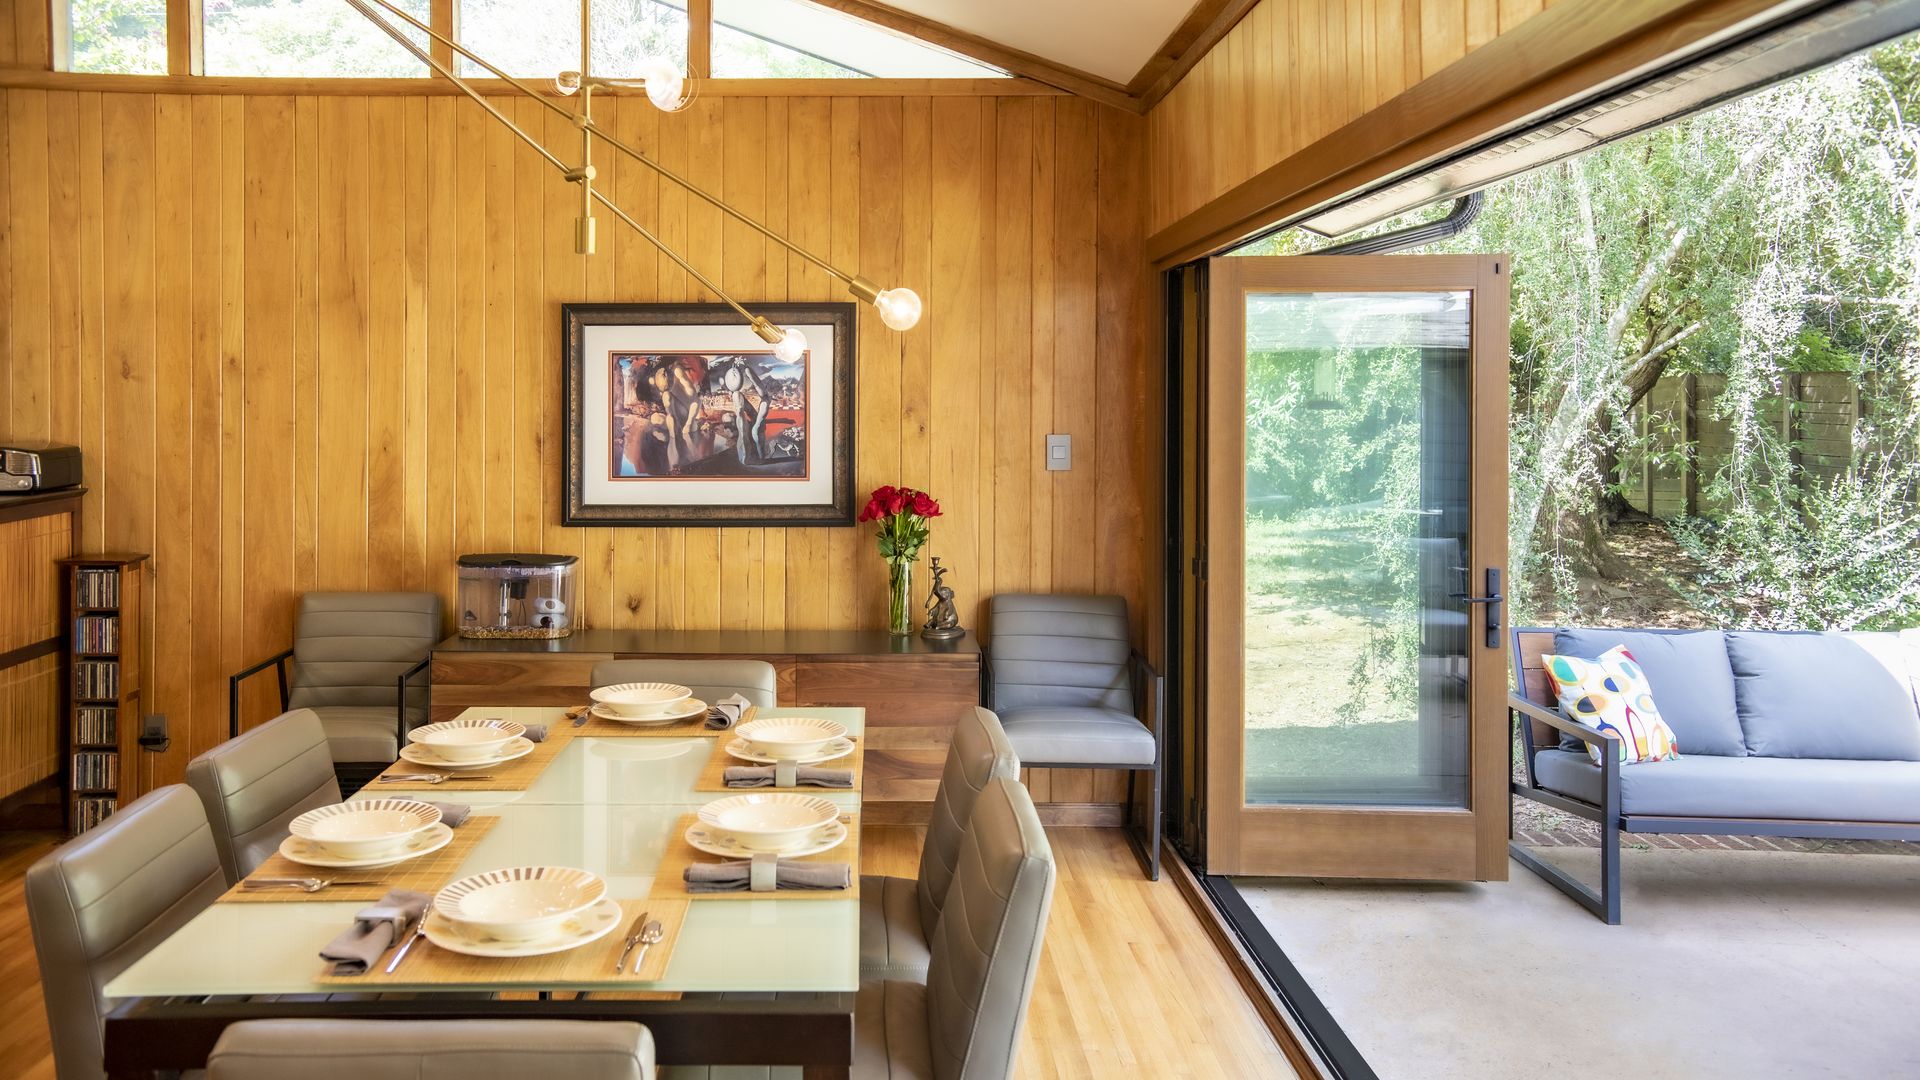 Dining room inside a modern home, with wood paneled interiors and vaulted ceiling